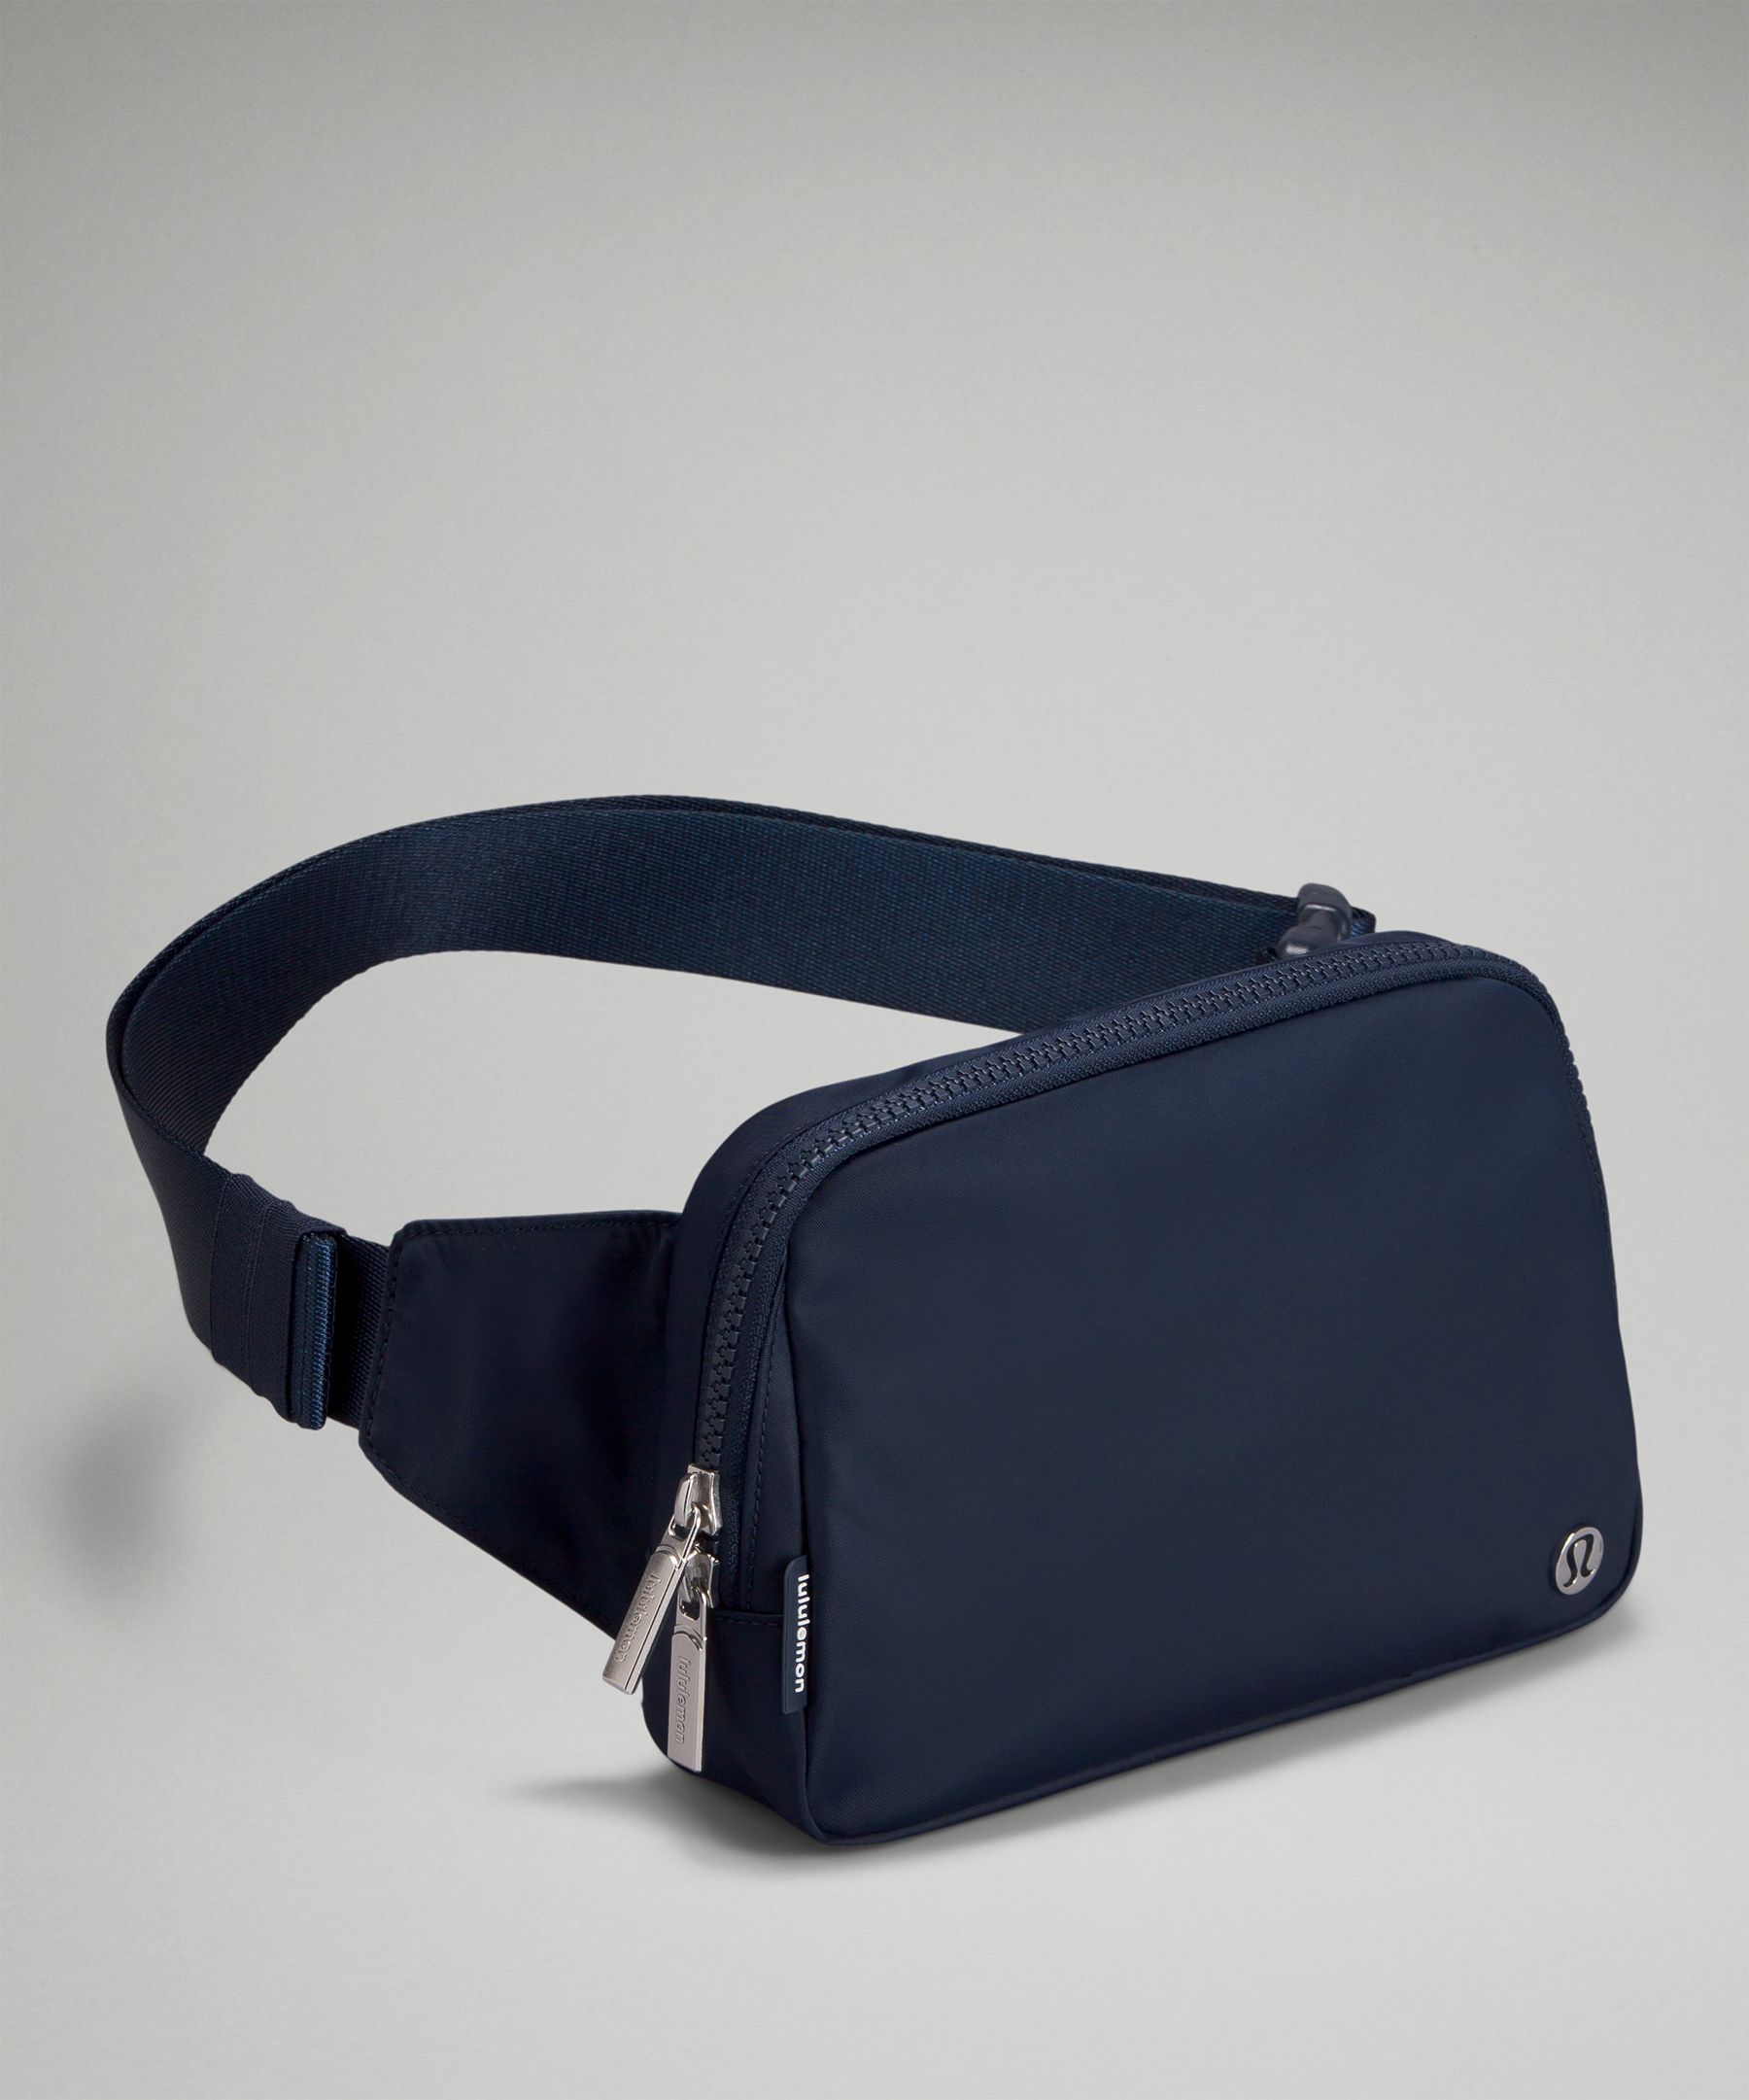 Wholesale bag lululemon to Add Style to Your Daily Activities 